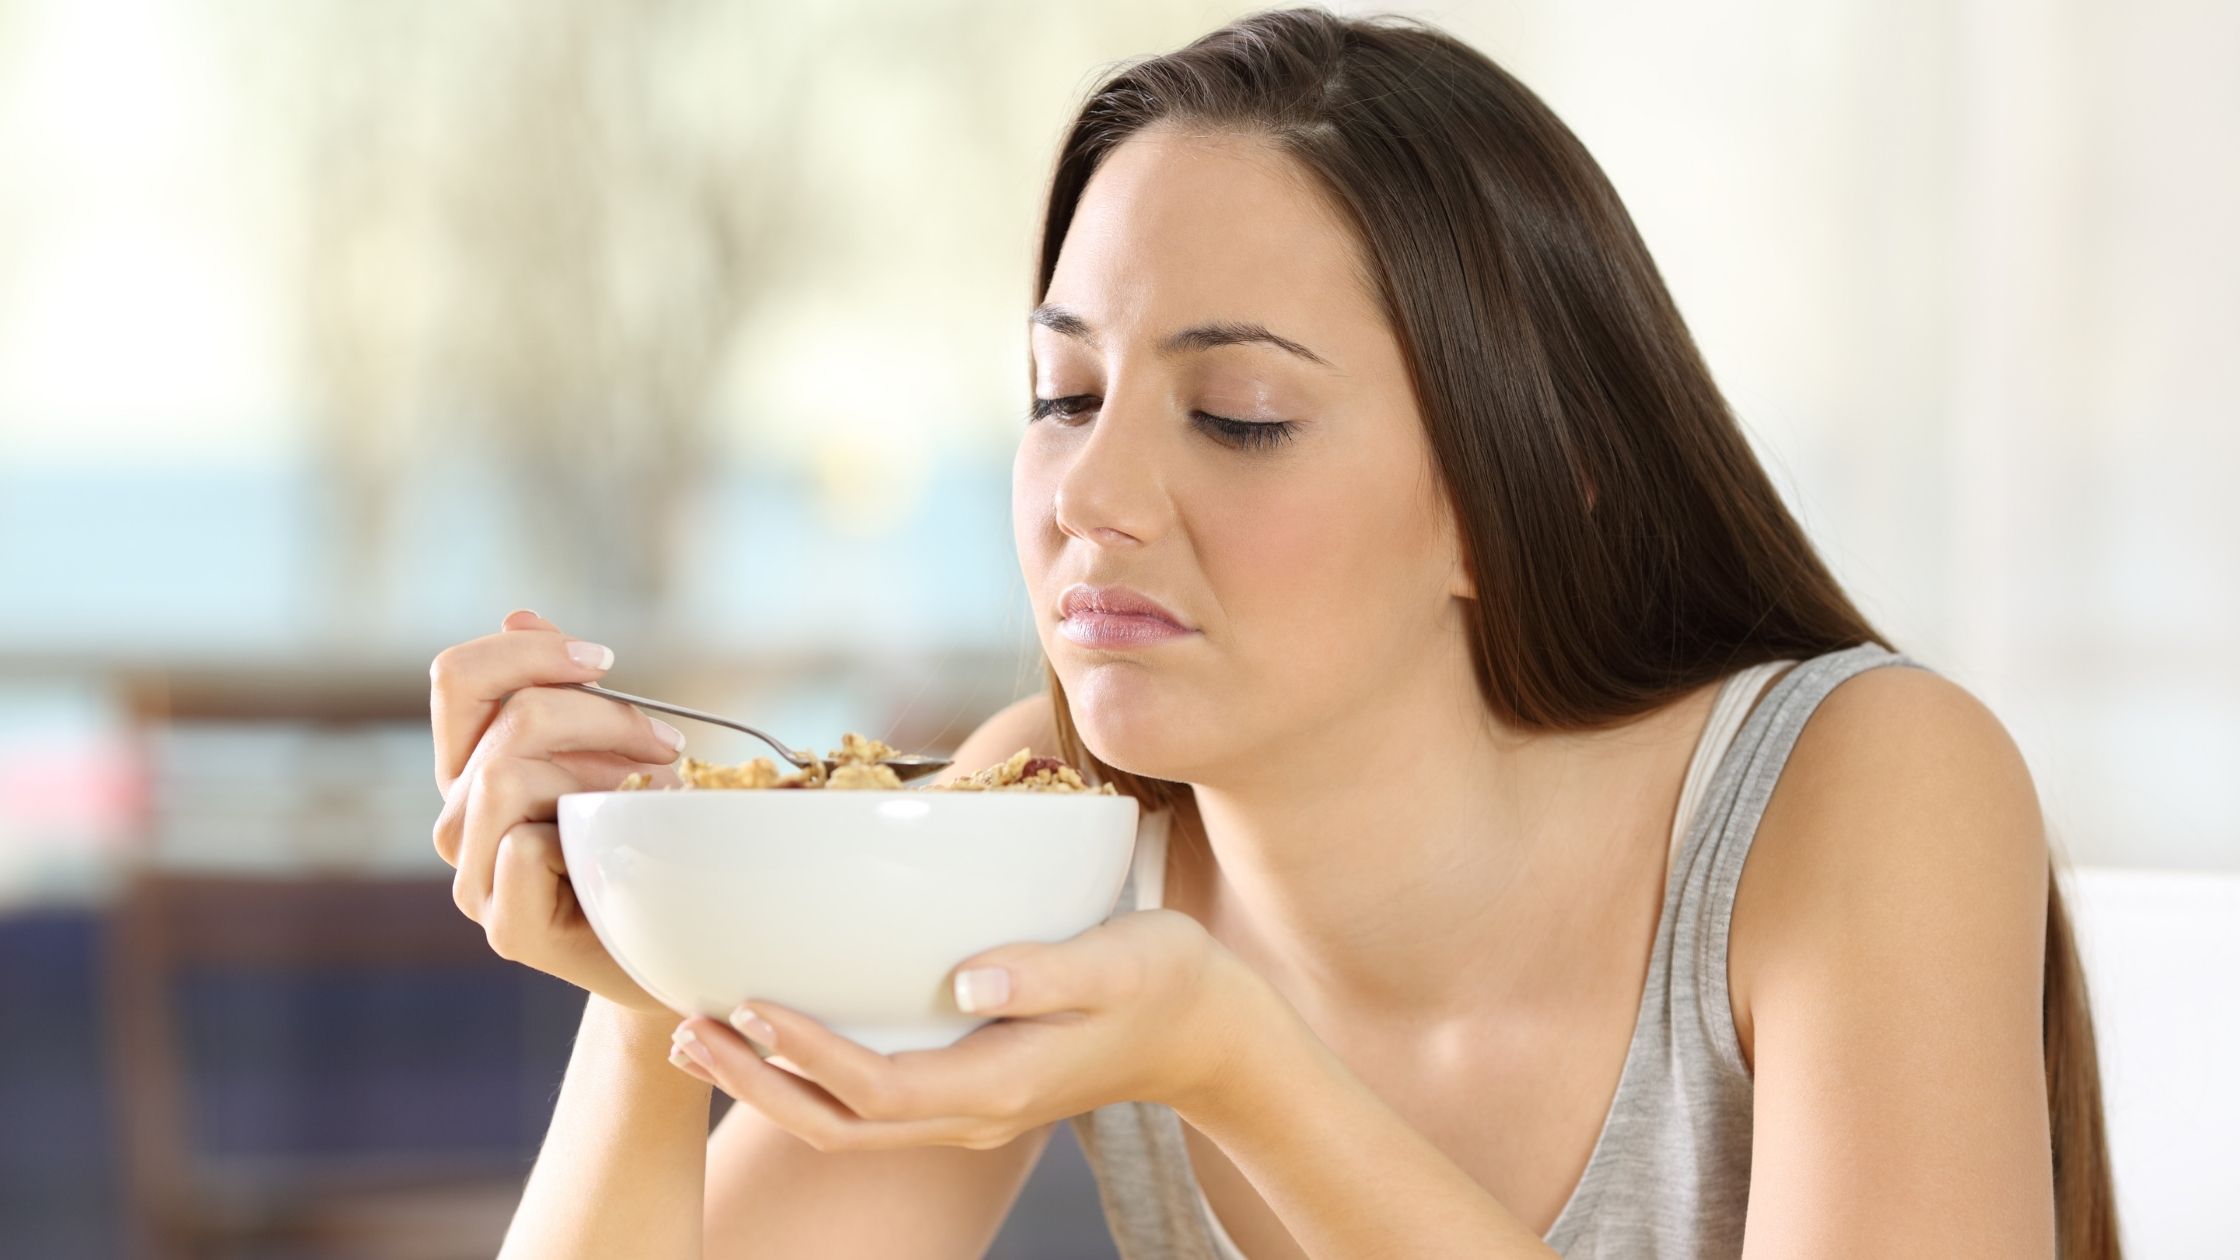 A women eating a bowel or cereal trying to increase fiber